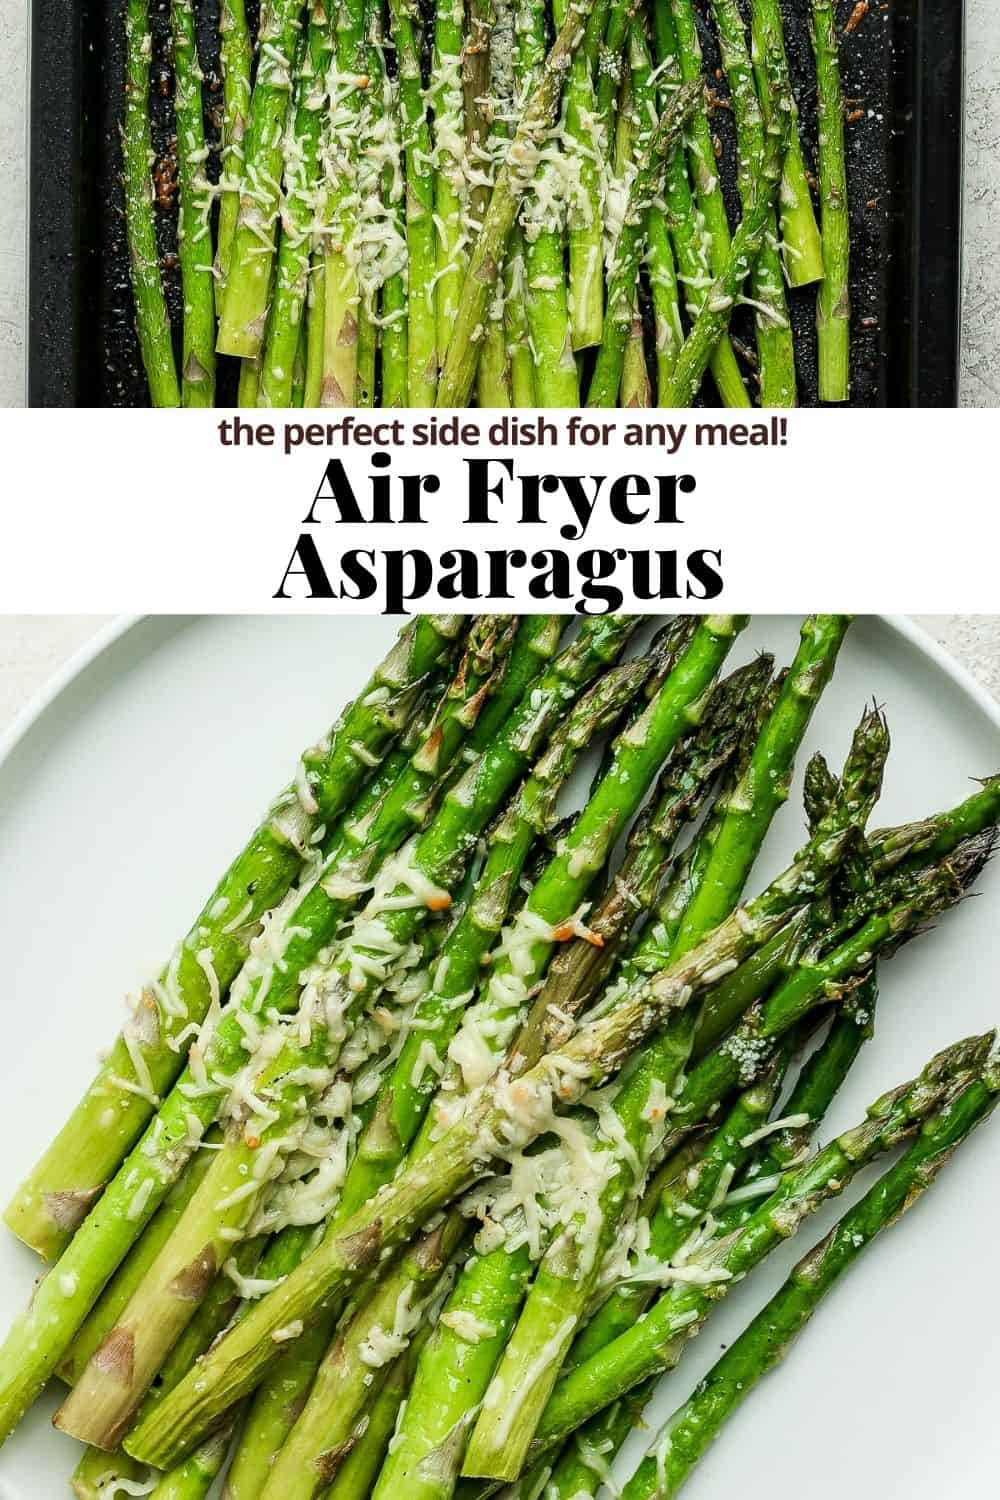 Pinterest image with asparagus on a black baking sheet as well as on a white plate.